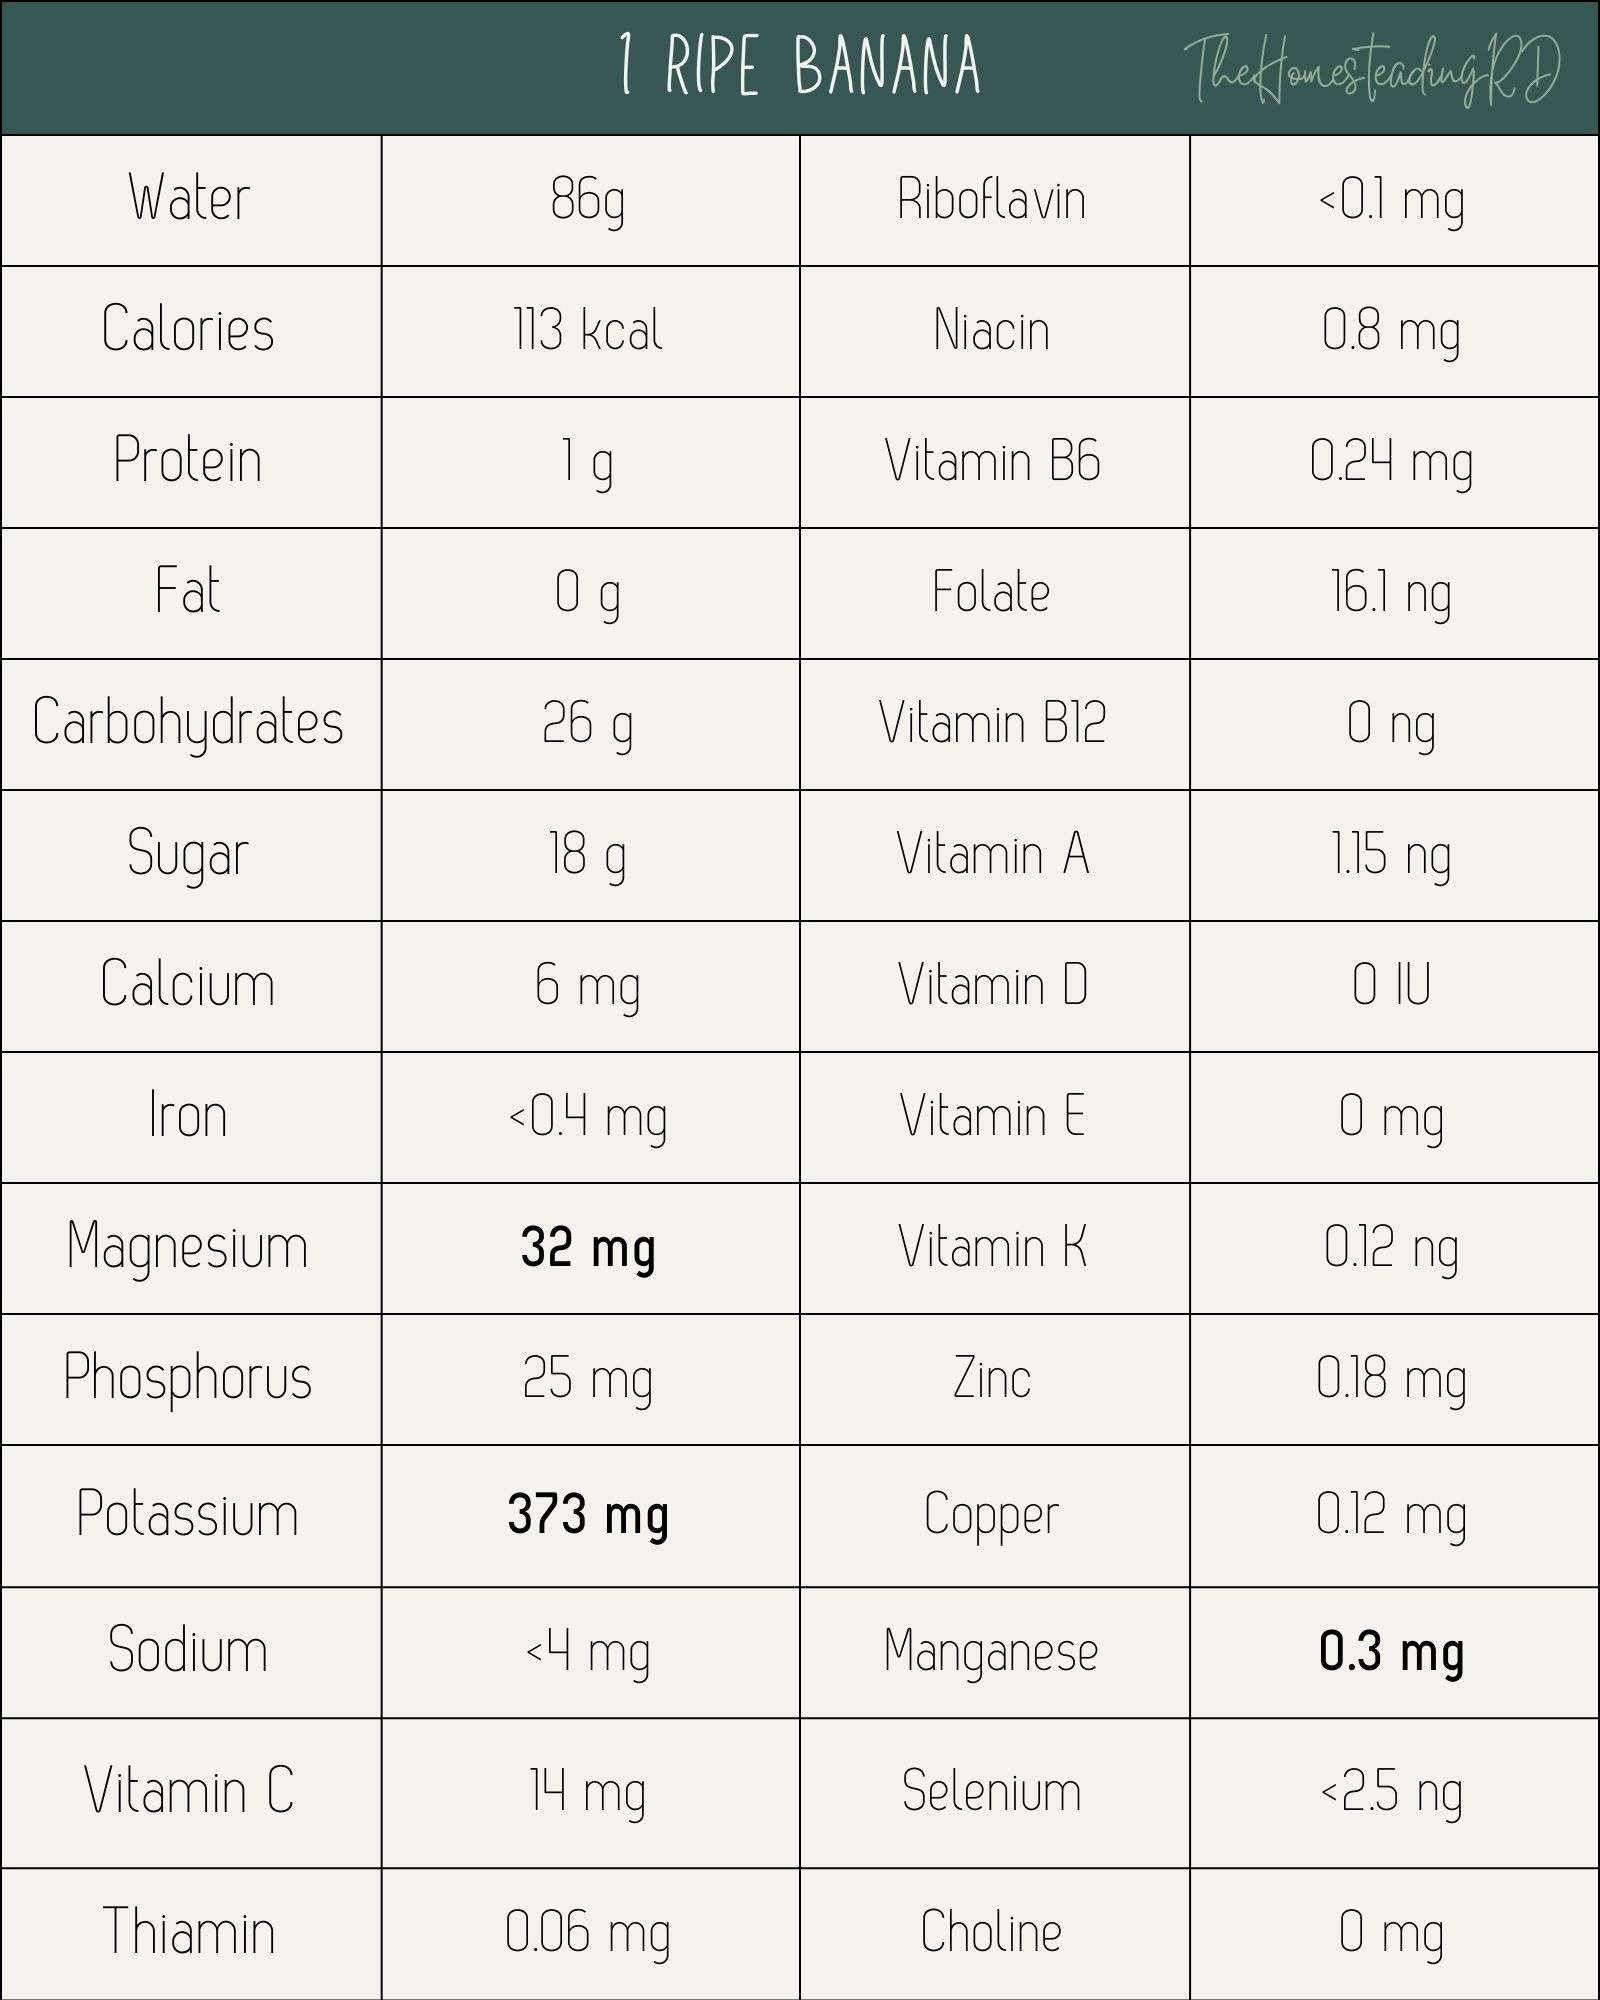 A table showing the nutritional data for 1 banana